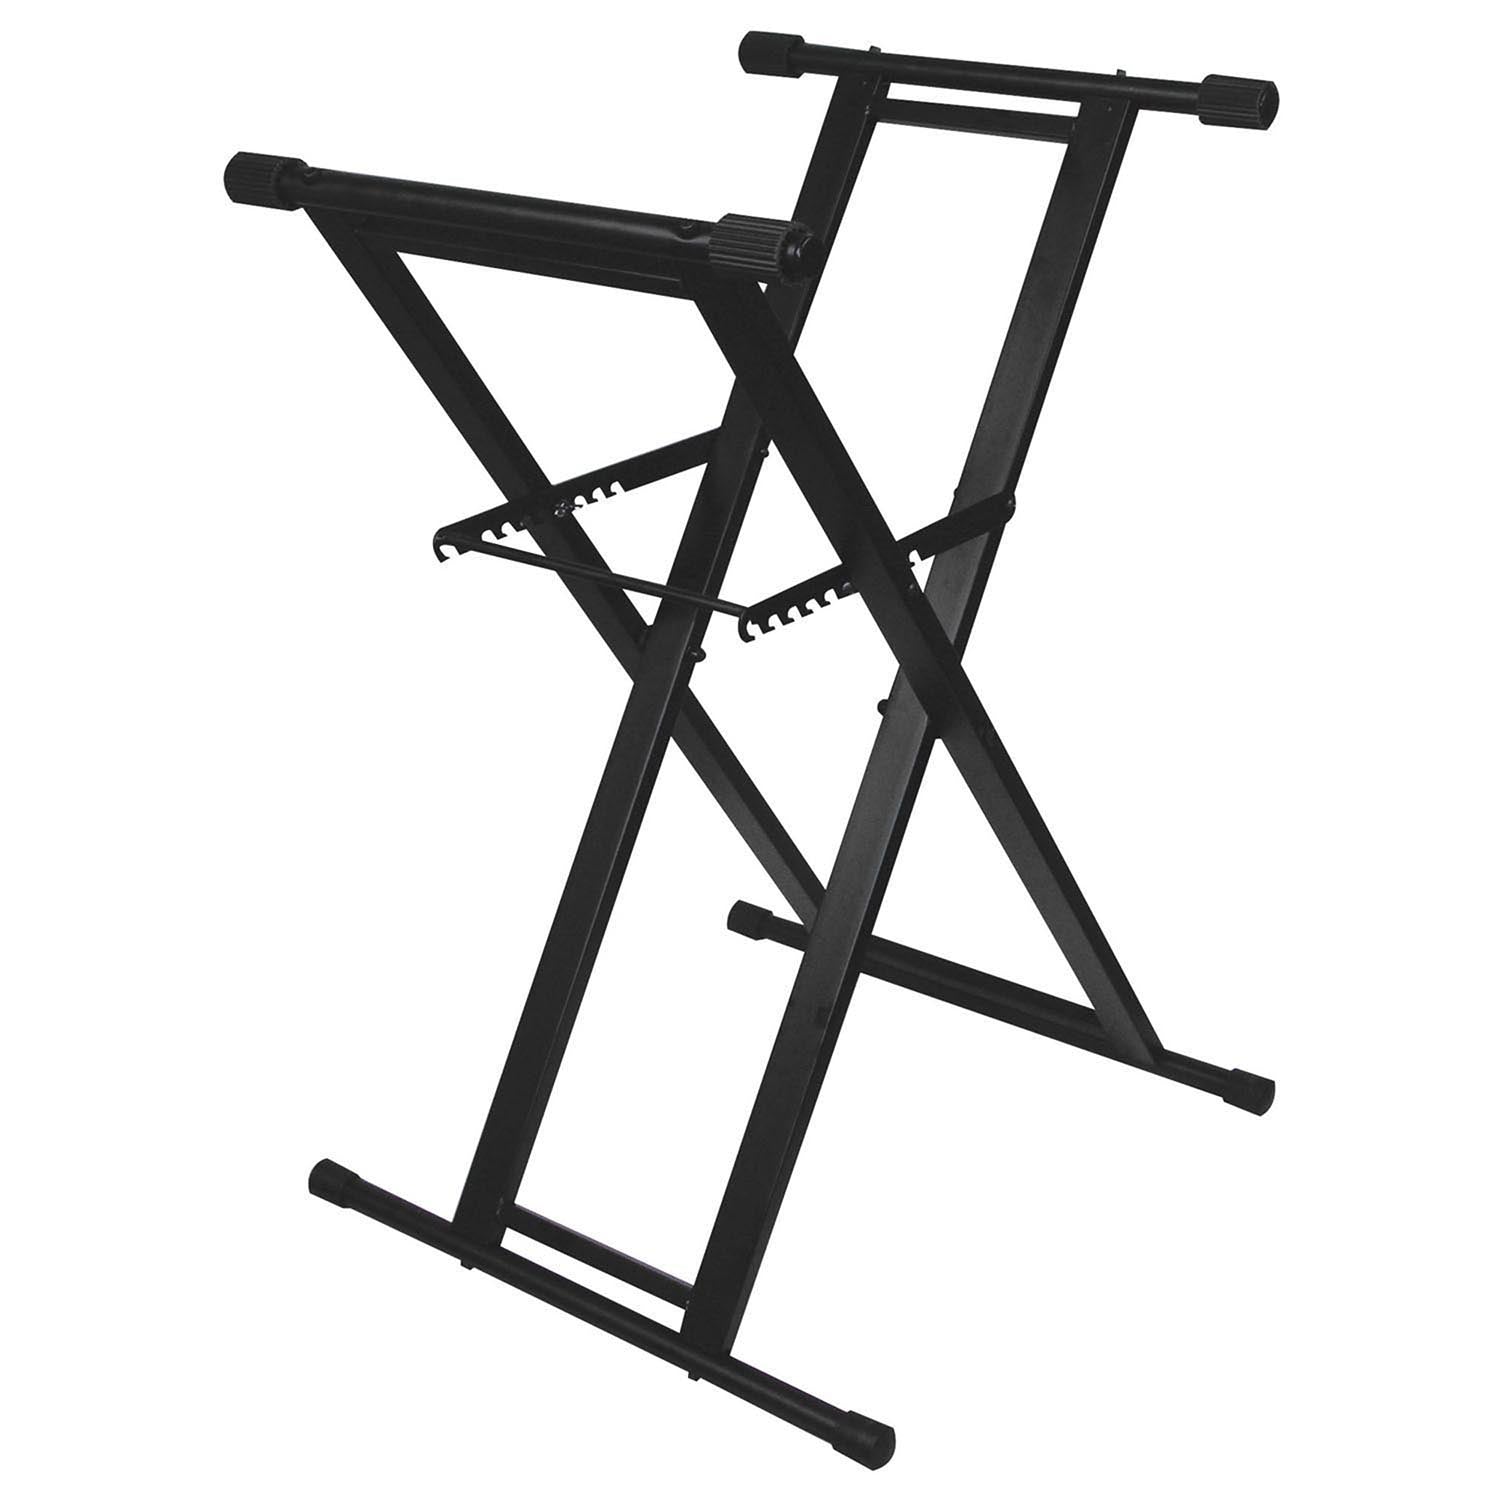 B-Stock: Odyssey LTBXS, Heavy-Duty X-Stand for DJ Coffins and Controller Cases - Black - Hollywood DJ